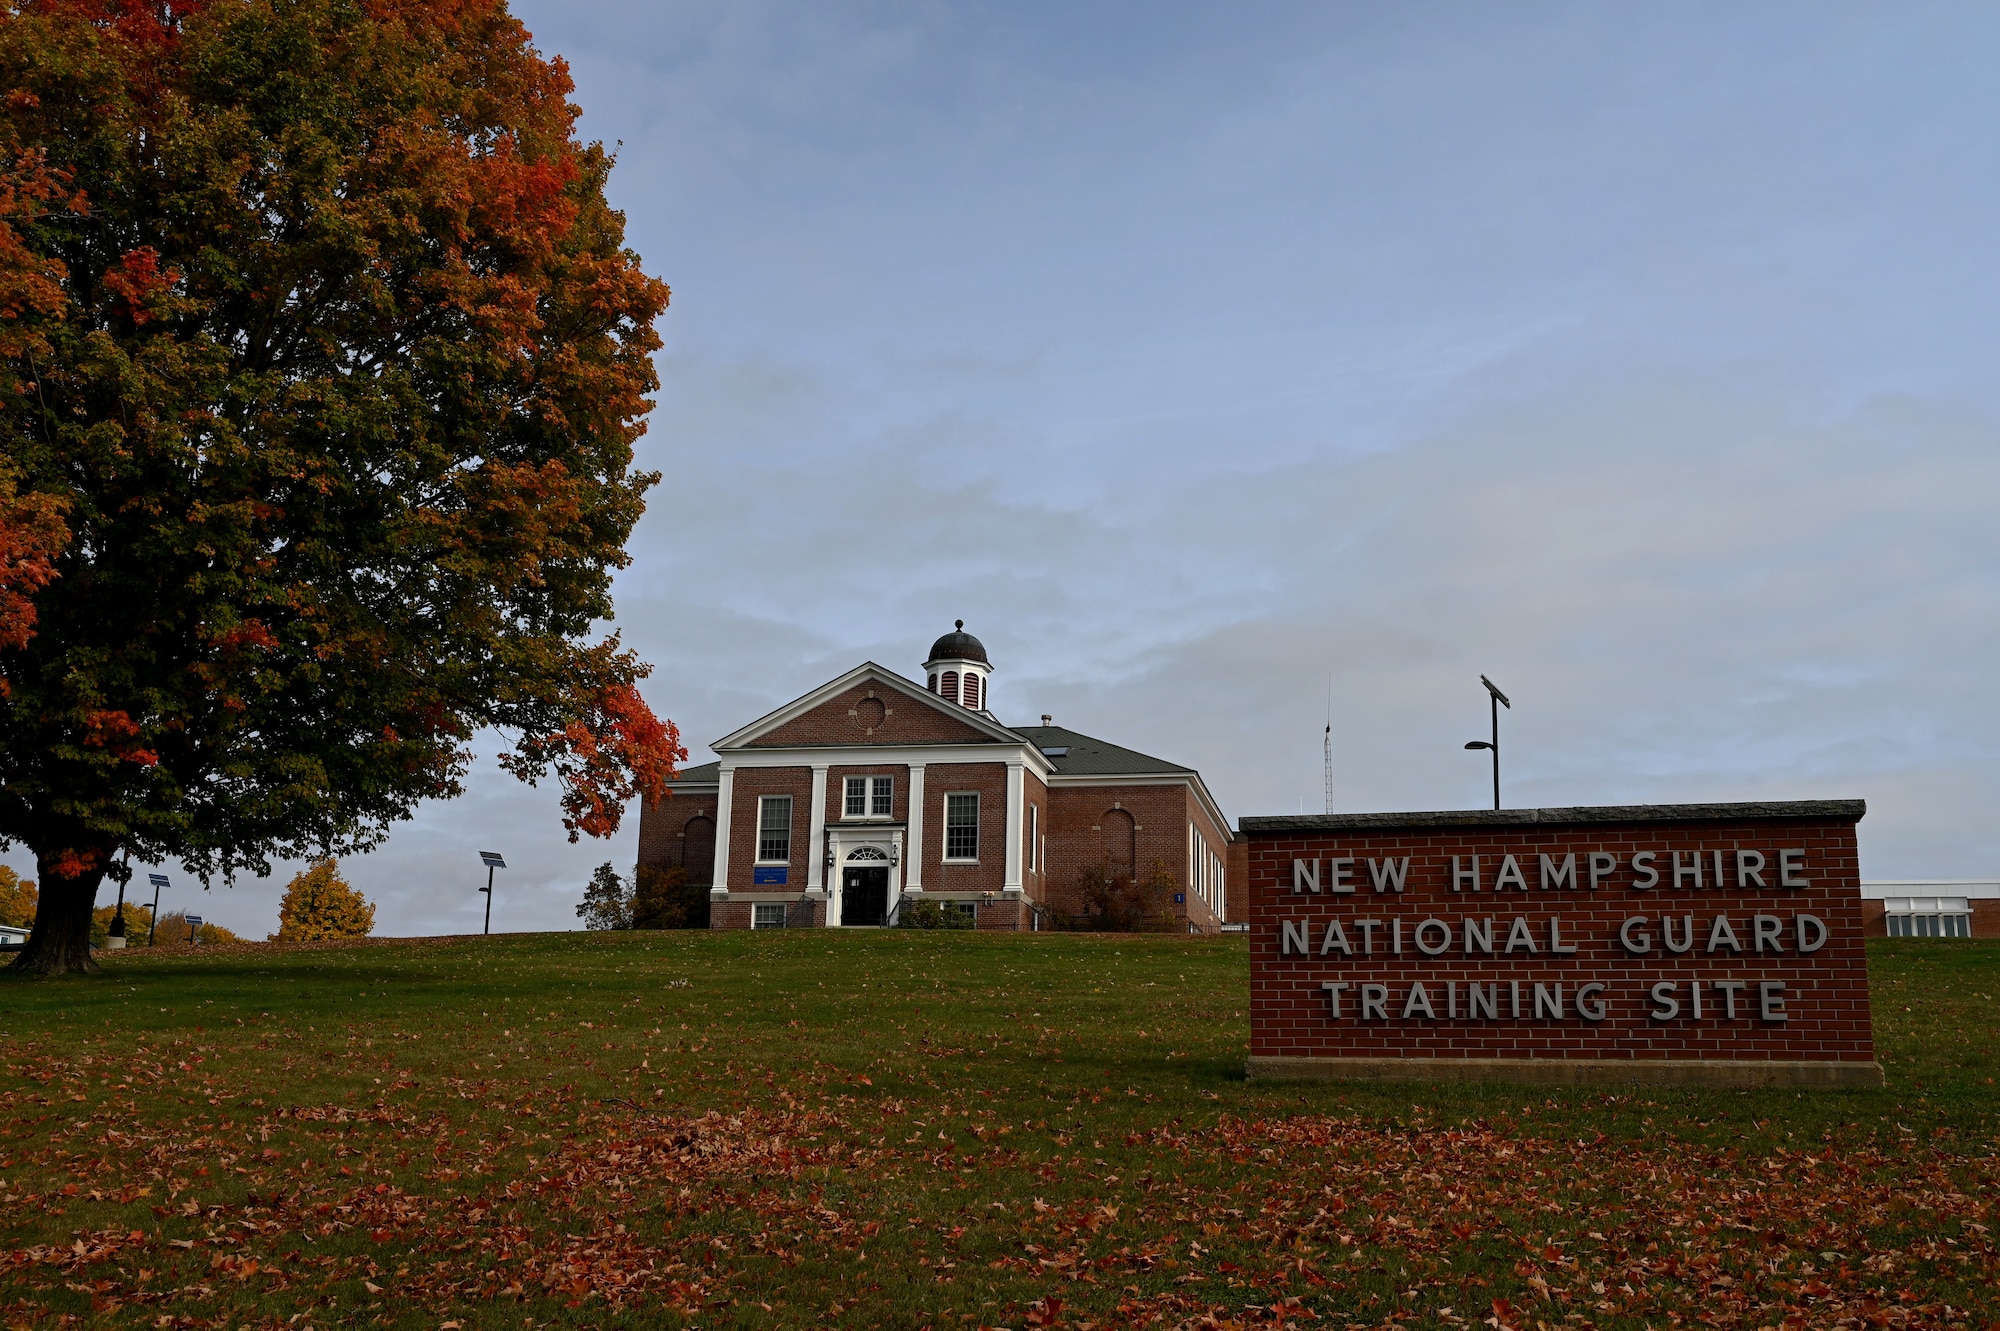 The New Hampshire National Guard Training Site in Center Strafford rests on a sprawling 100-acre lot that was formerly a scholastic academy built in the early 1900s.